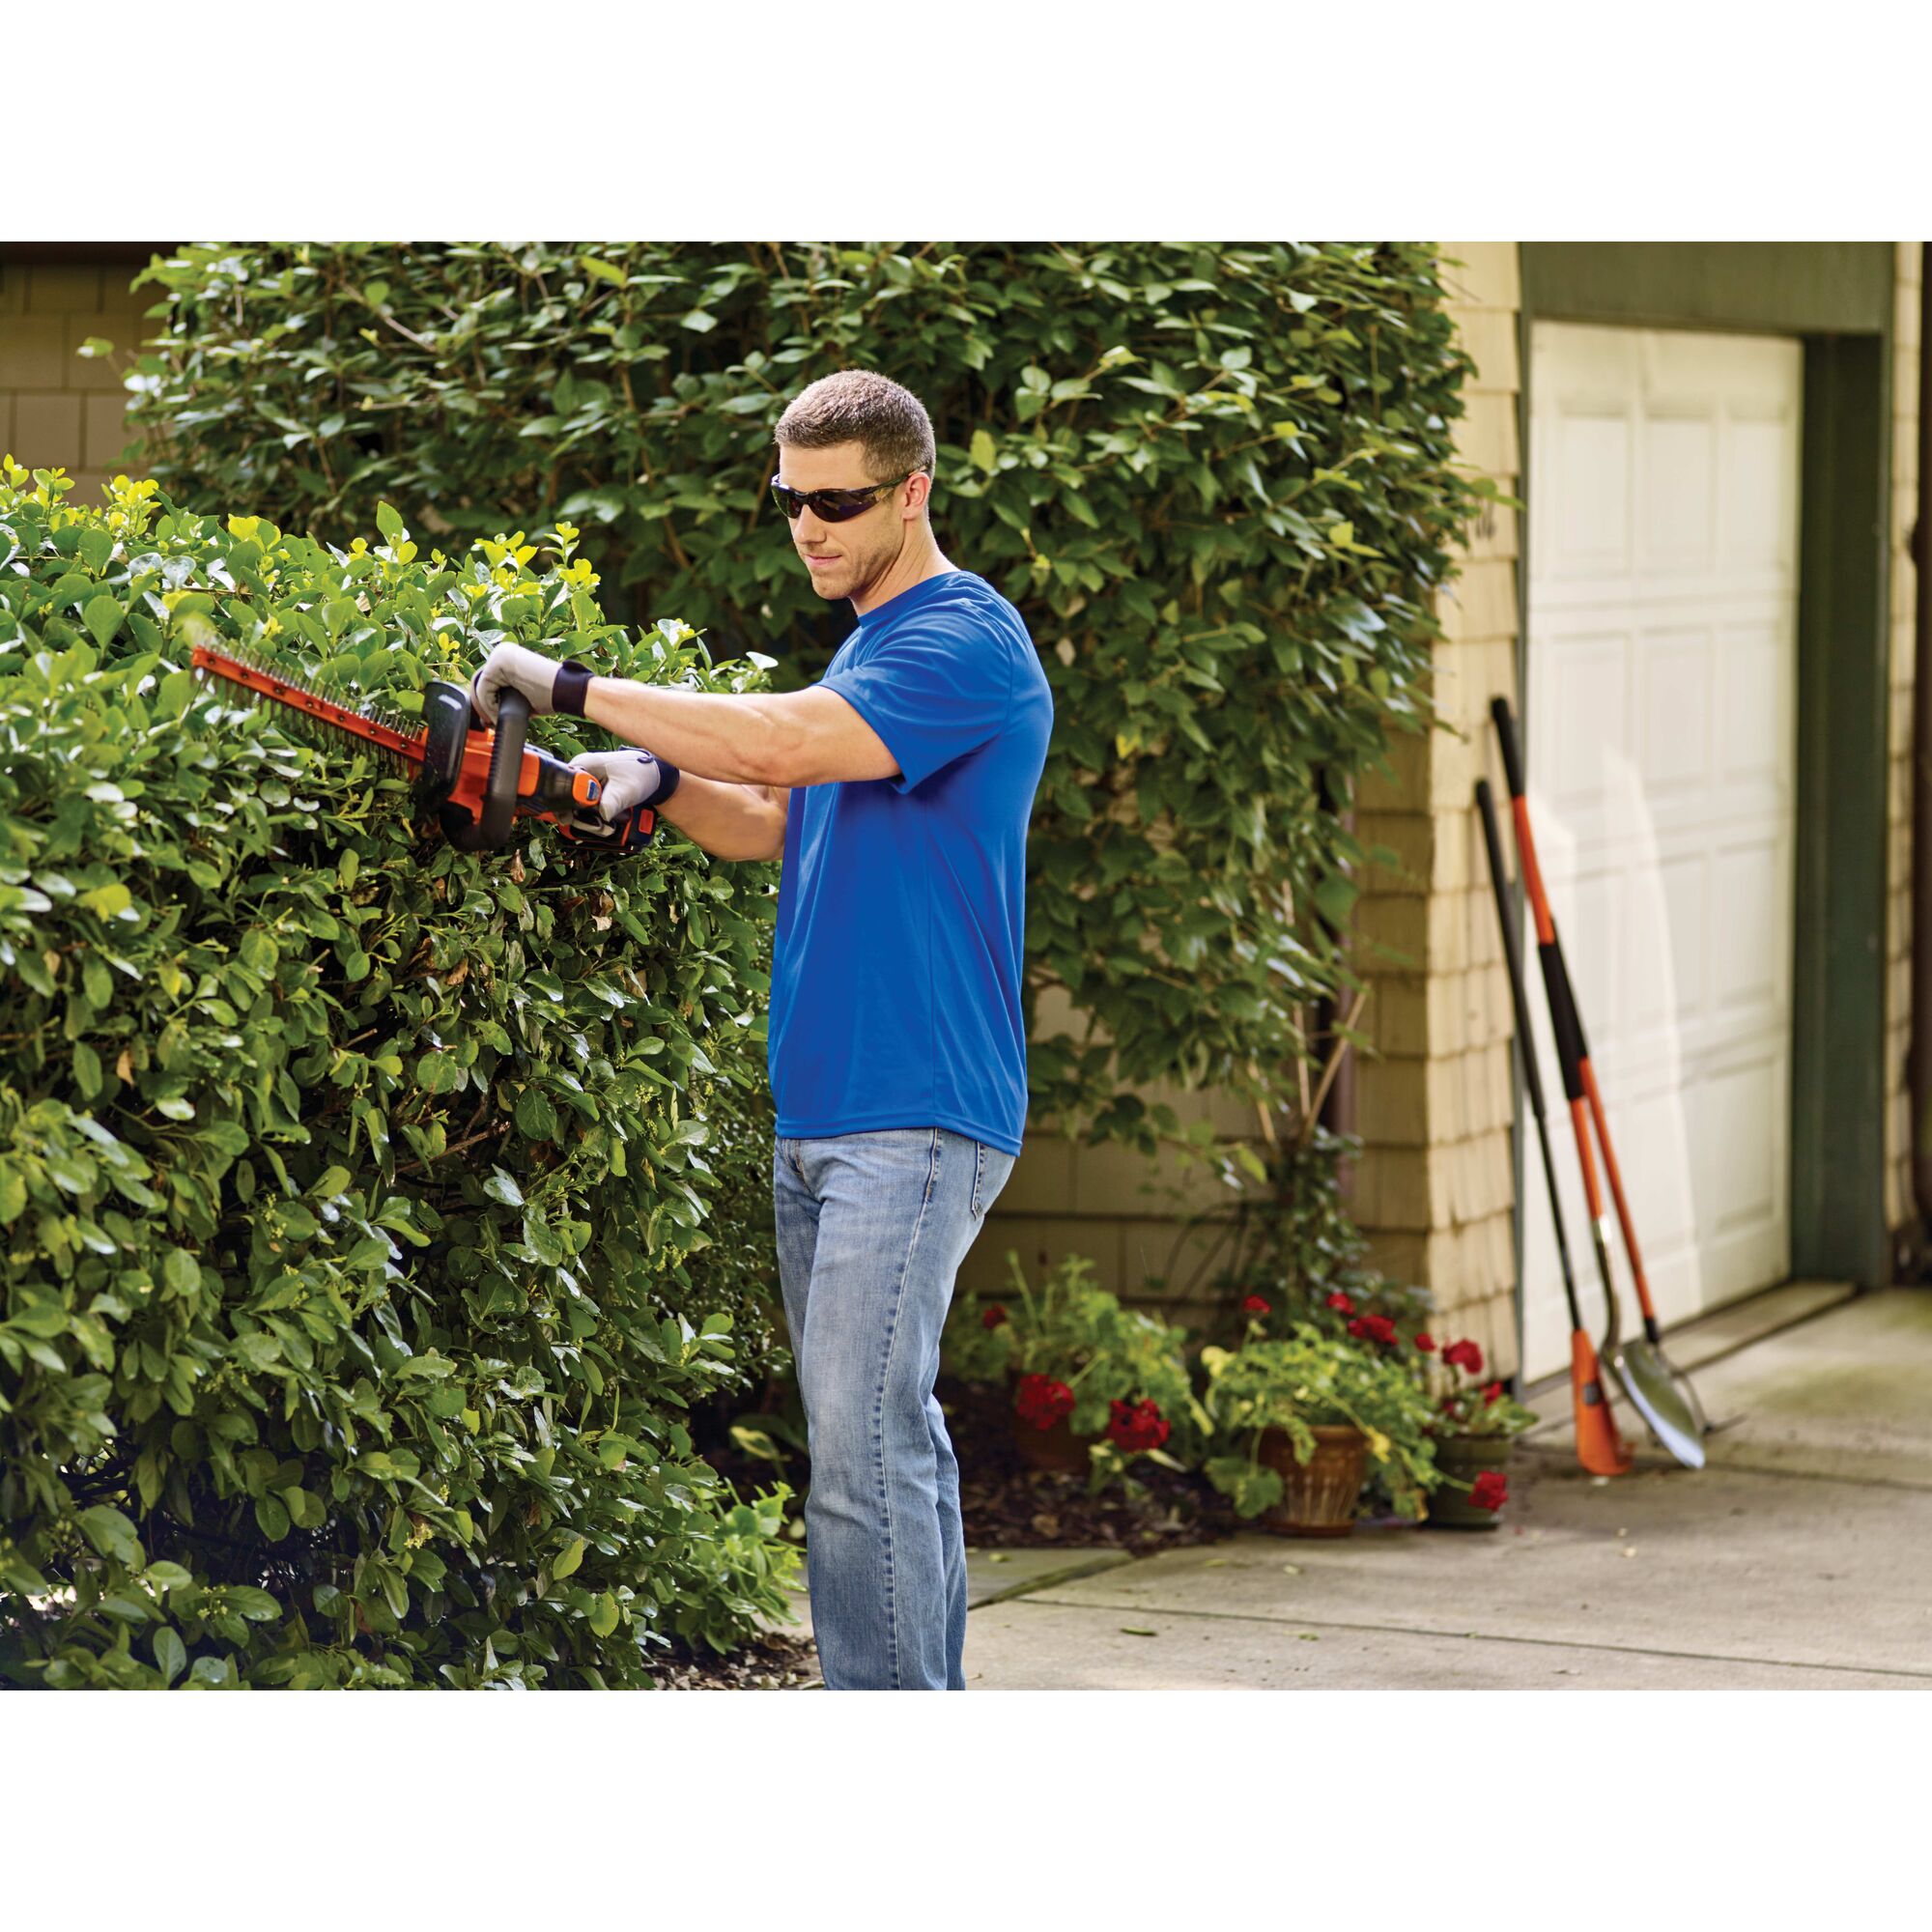 40 volt lithium 24 inch powercut hedge trimmer being used by a person.